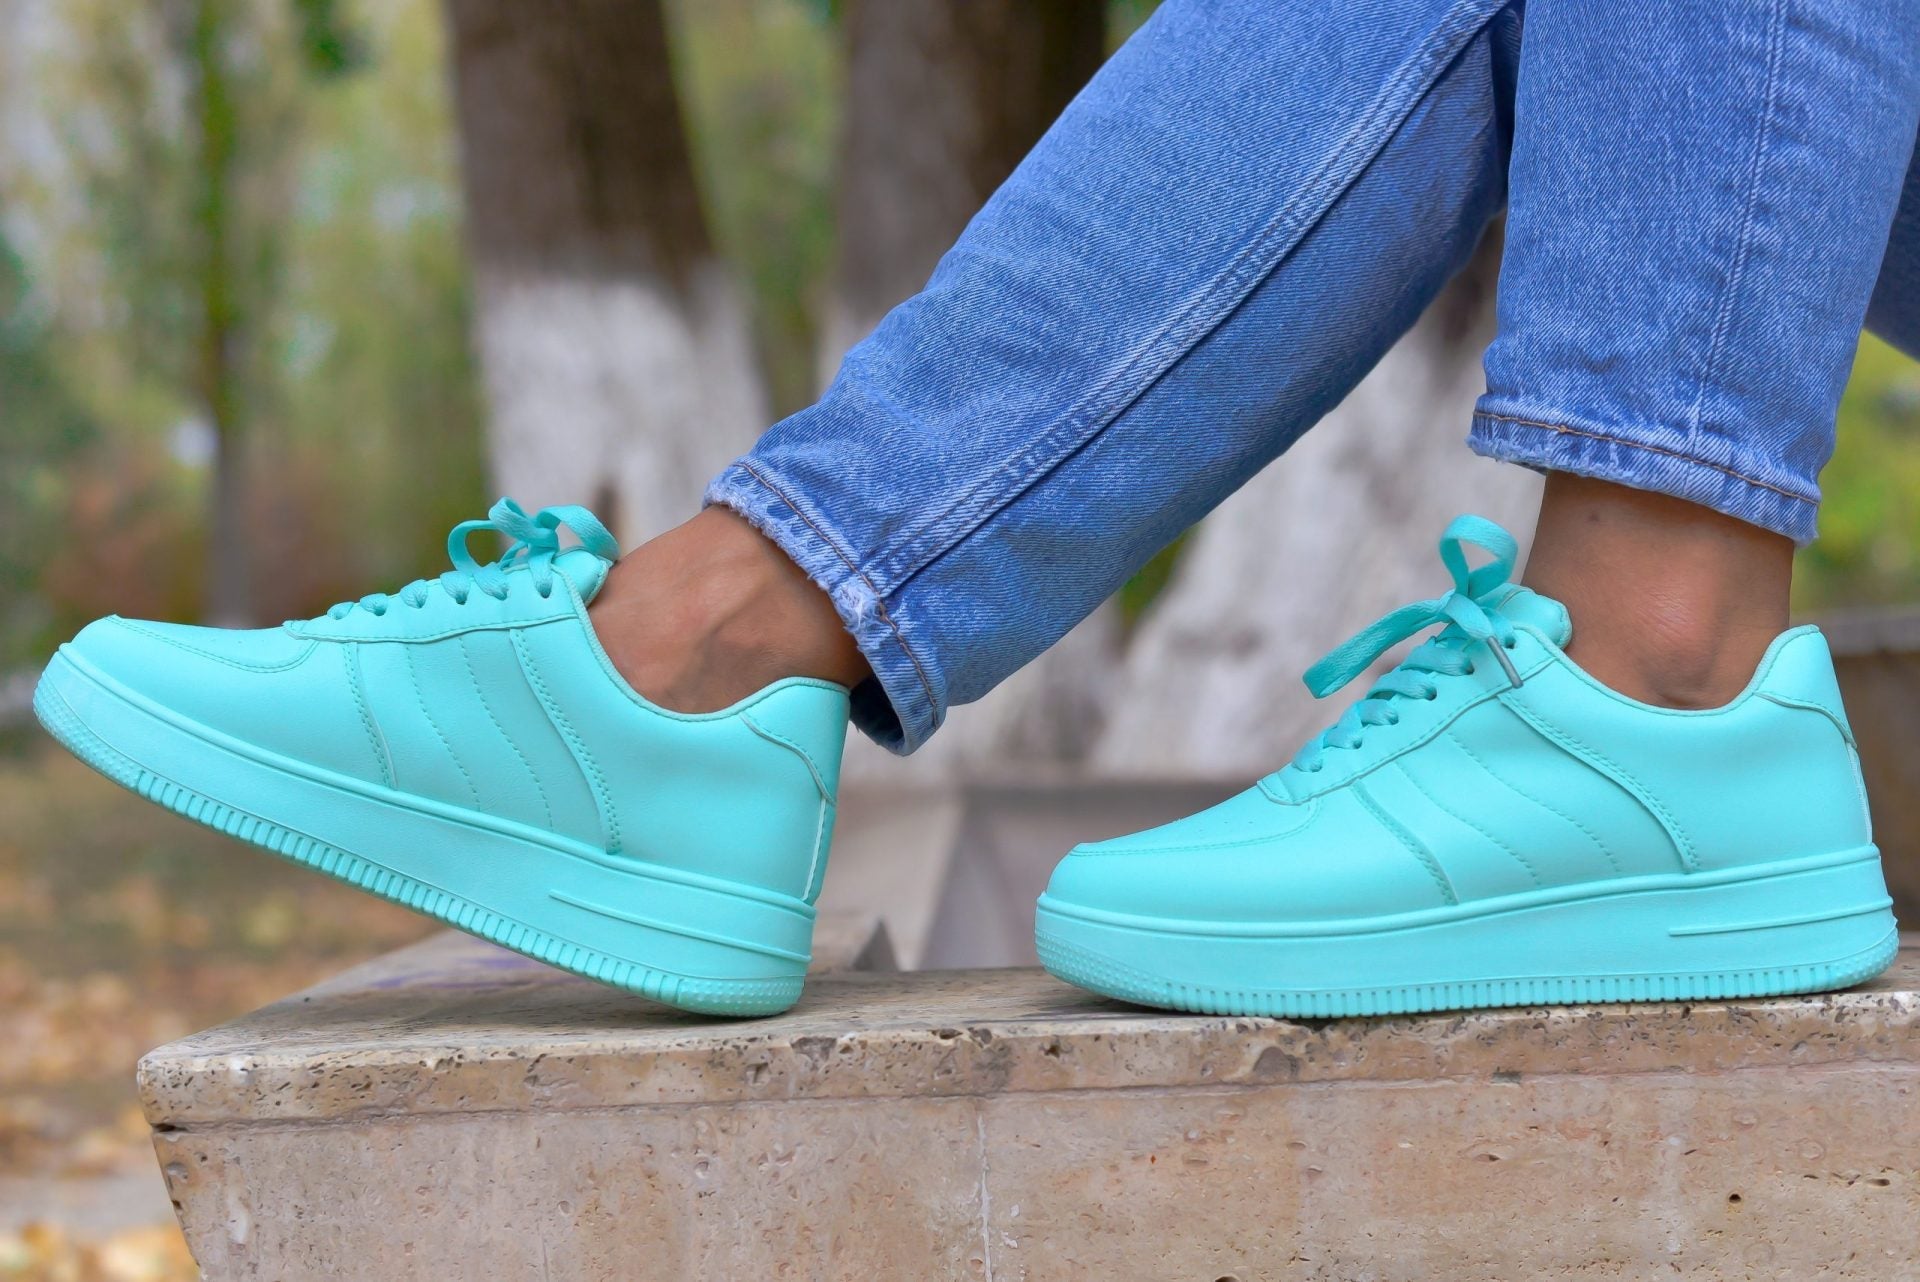 Women's Turquoise Esmeralda Basketball Shoes Made of Ecological Leather